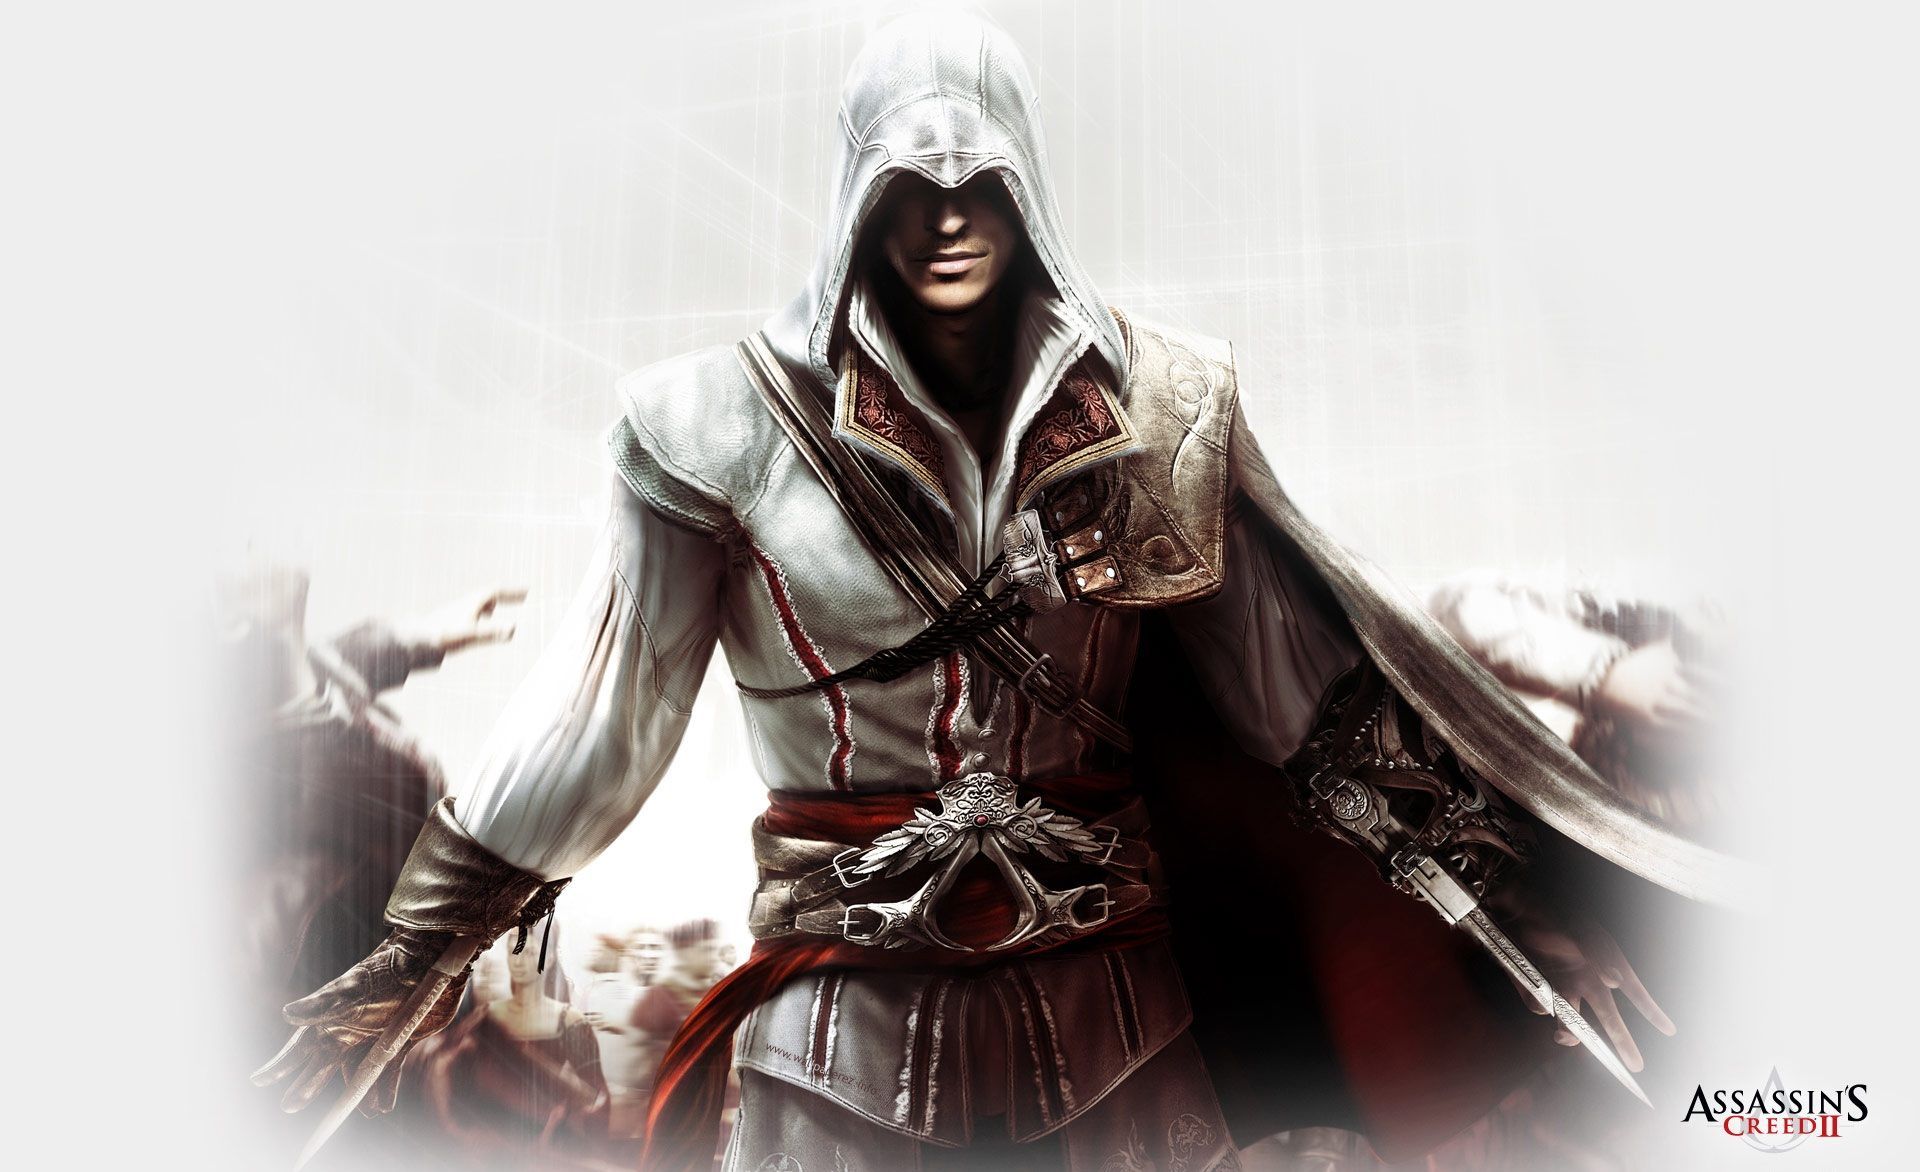 Assassin's Creed II Best Game HD Wallpapers - All HD Wallpapers